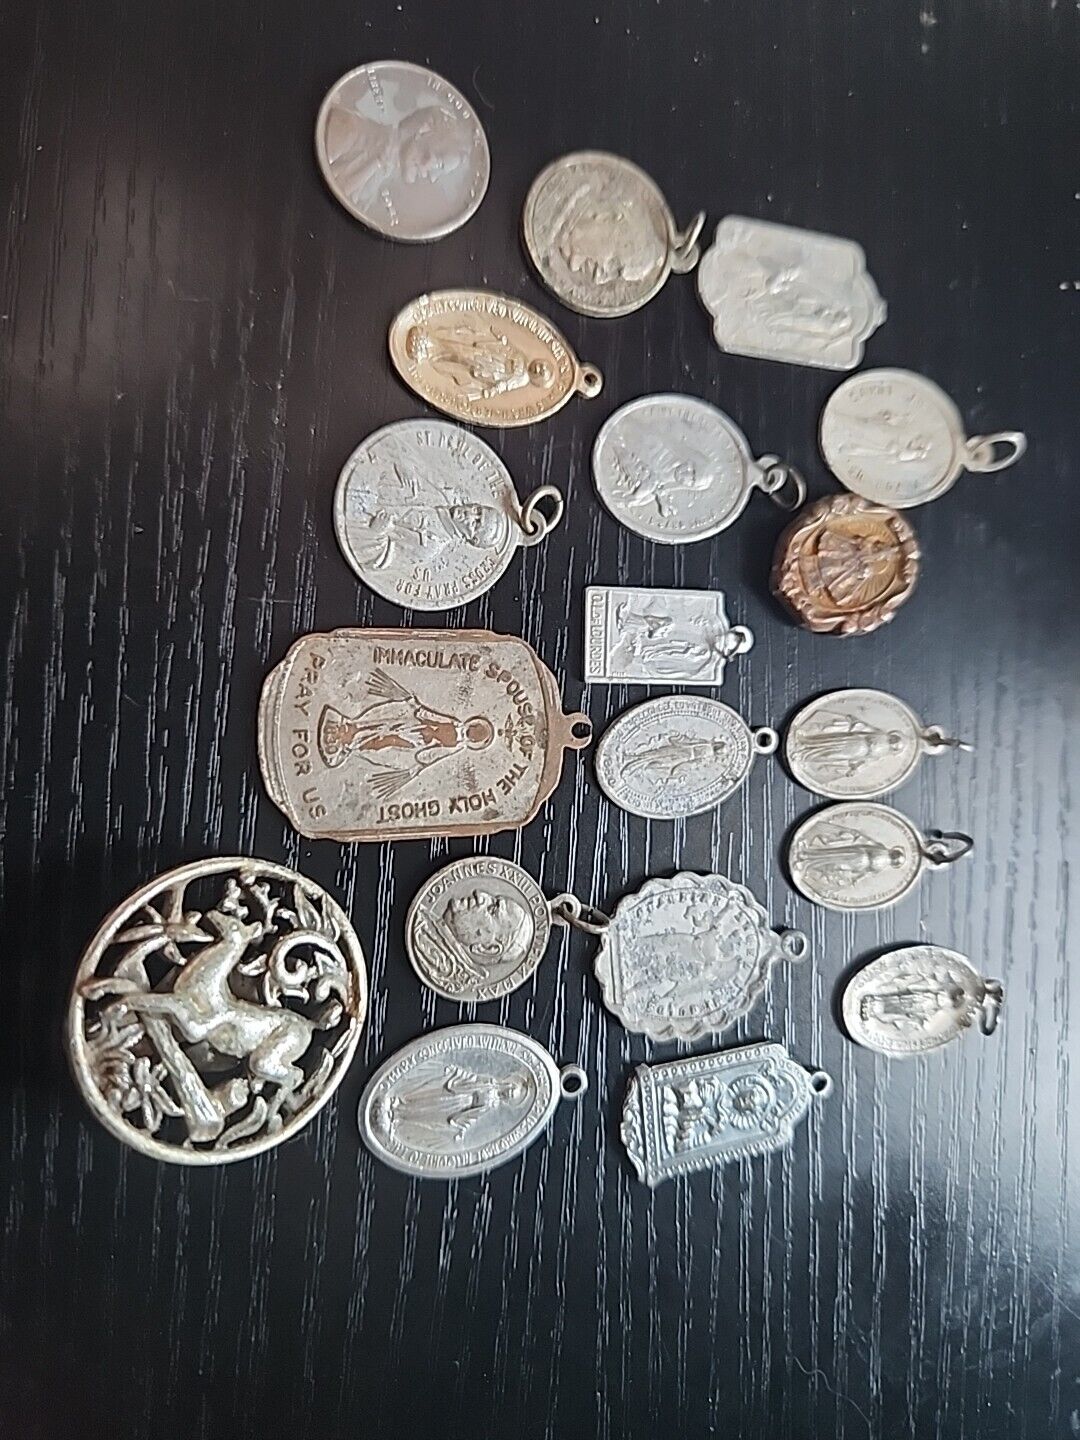 Catholic Religious Medal Lot of 19 Antique and Vintage